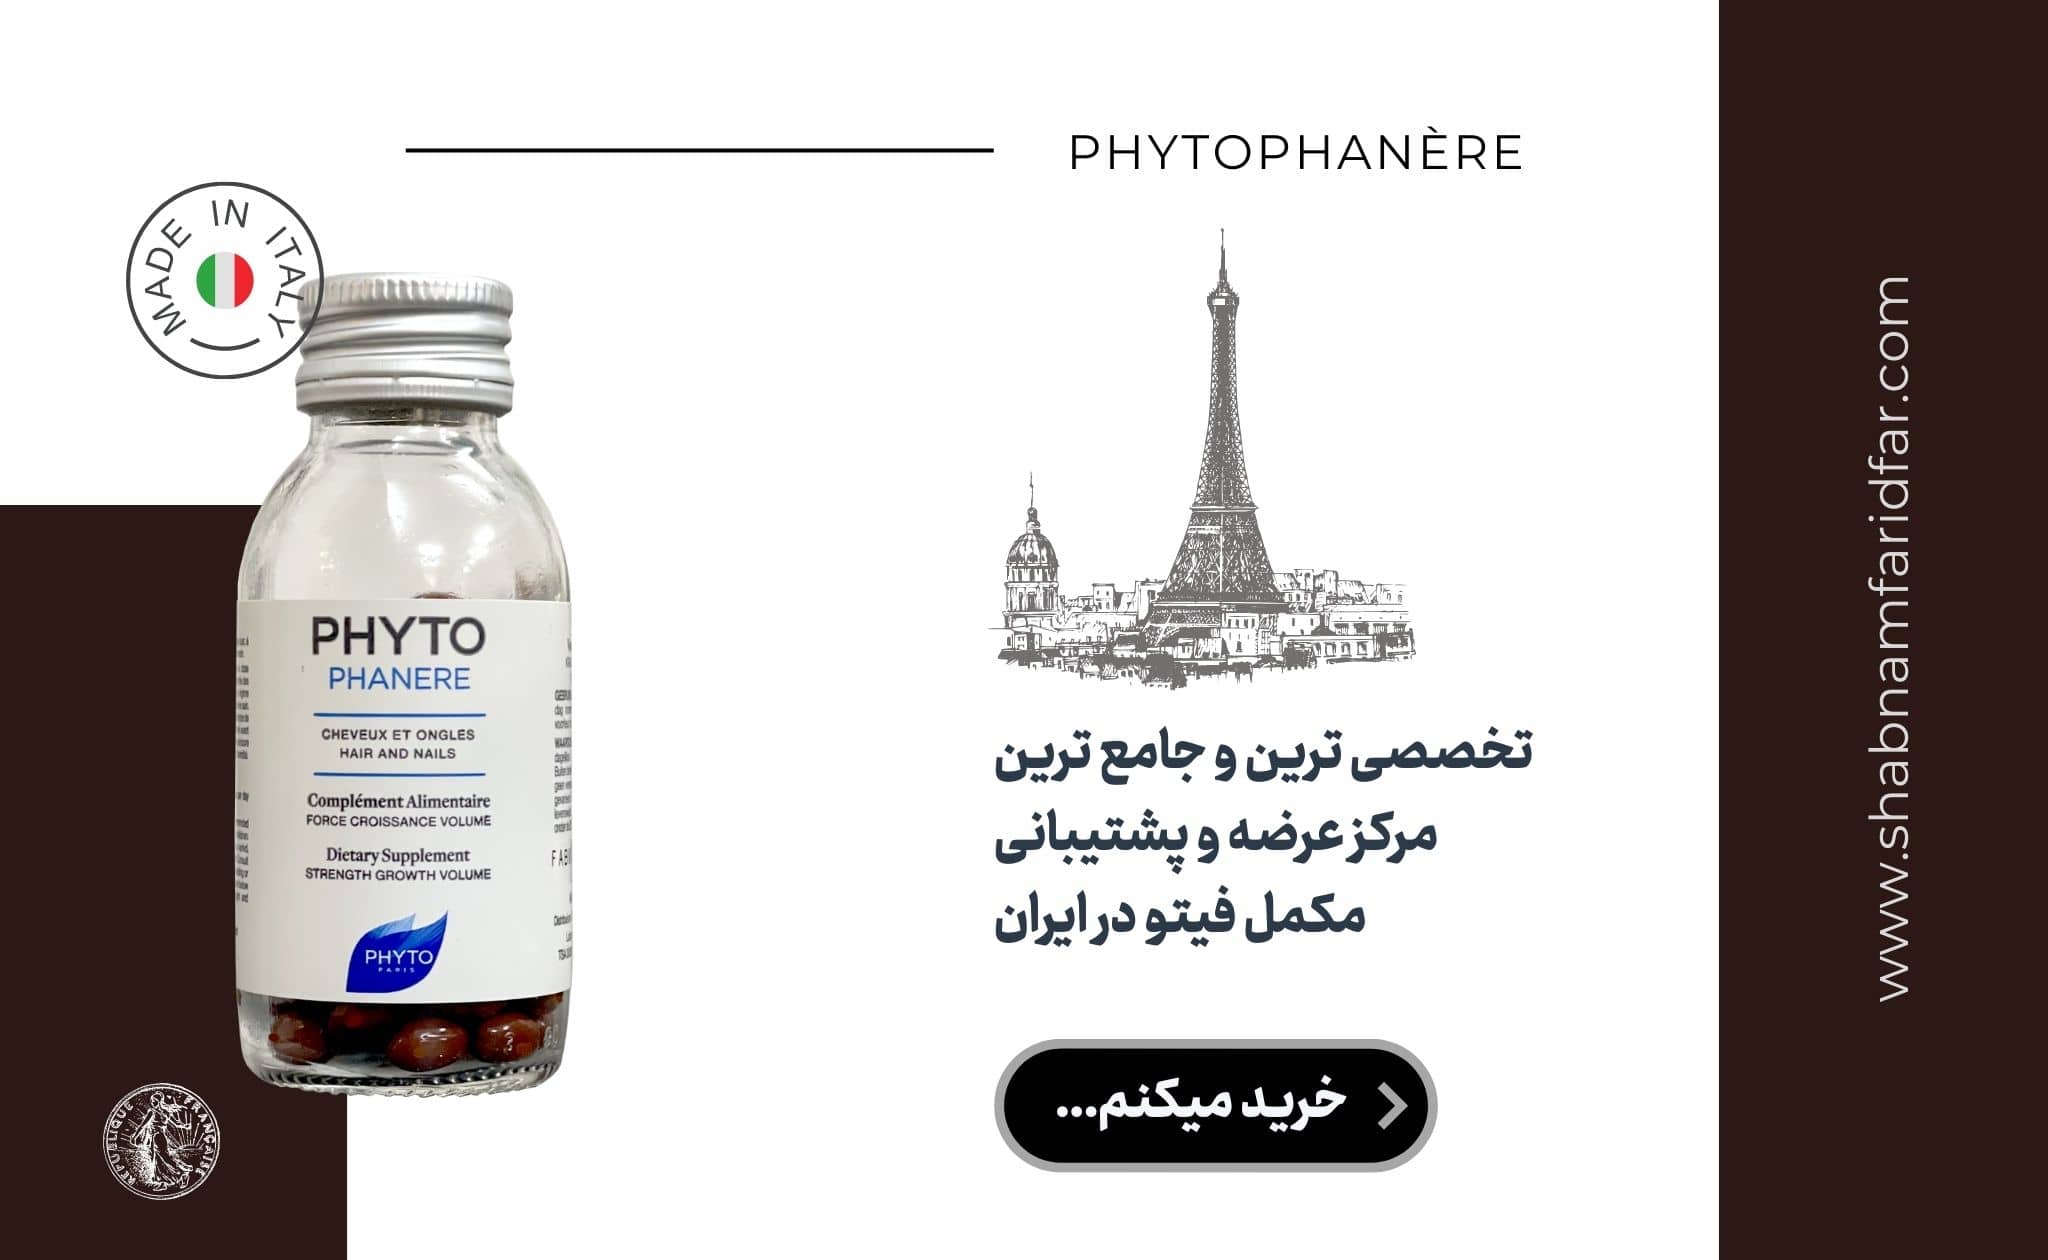 the PHYTOPHANERE sale1